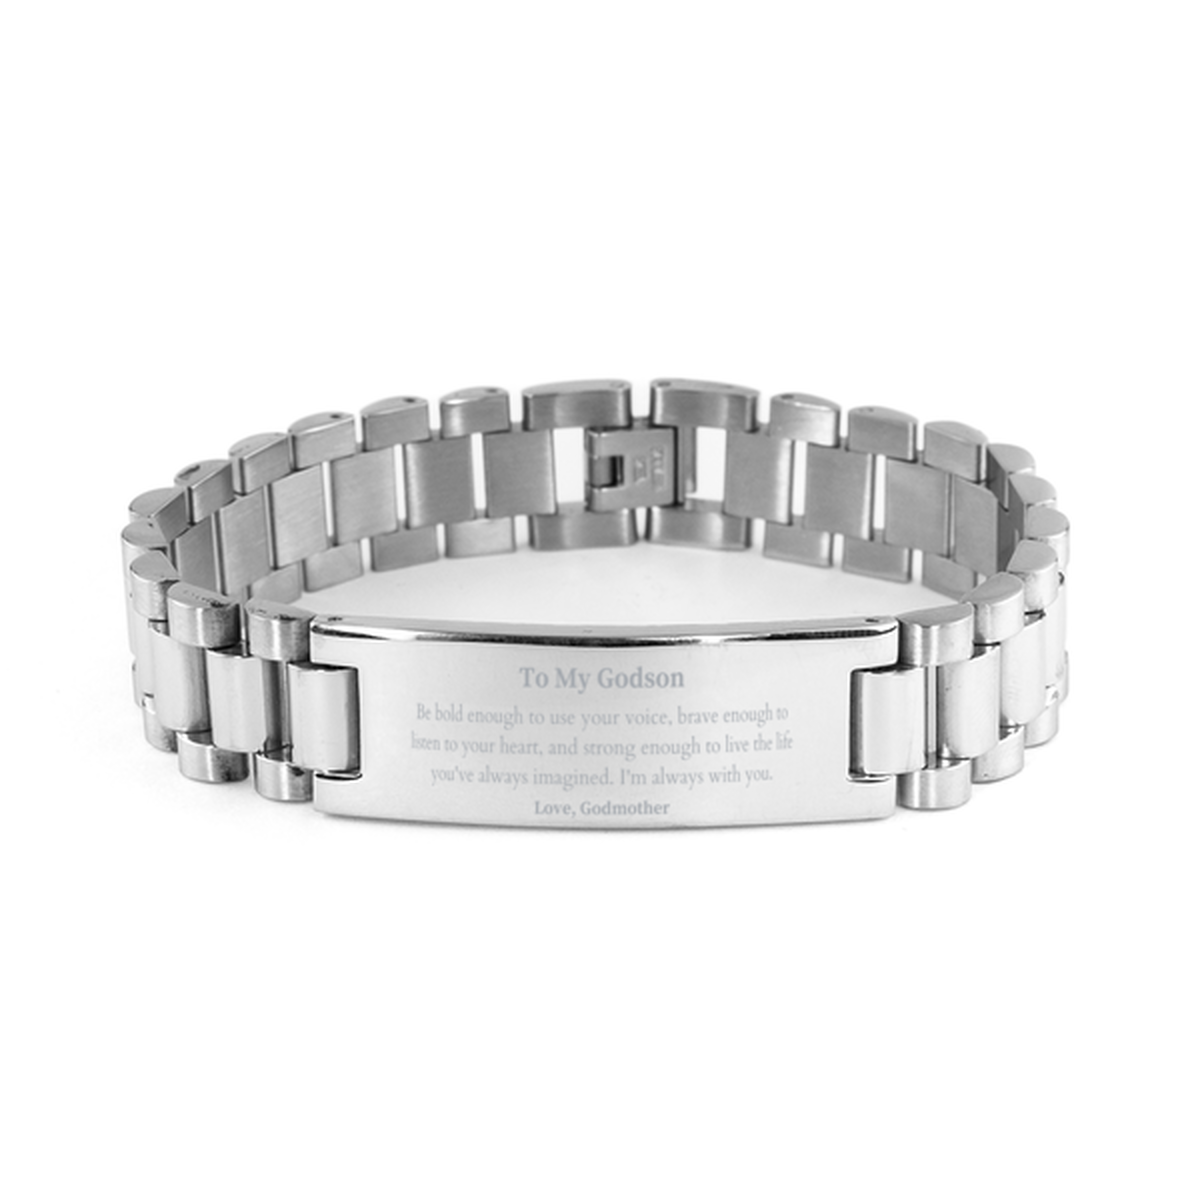 Keepsake Godson Ladder Stainless Steel Bracelet Gift Idea Graduation Christmas Birthday Godson from Godmother, Godson Be bold enough to use your voice, brave enough to listen to your heart. Love, Godmother